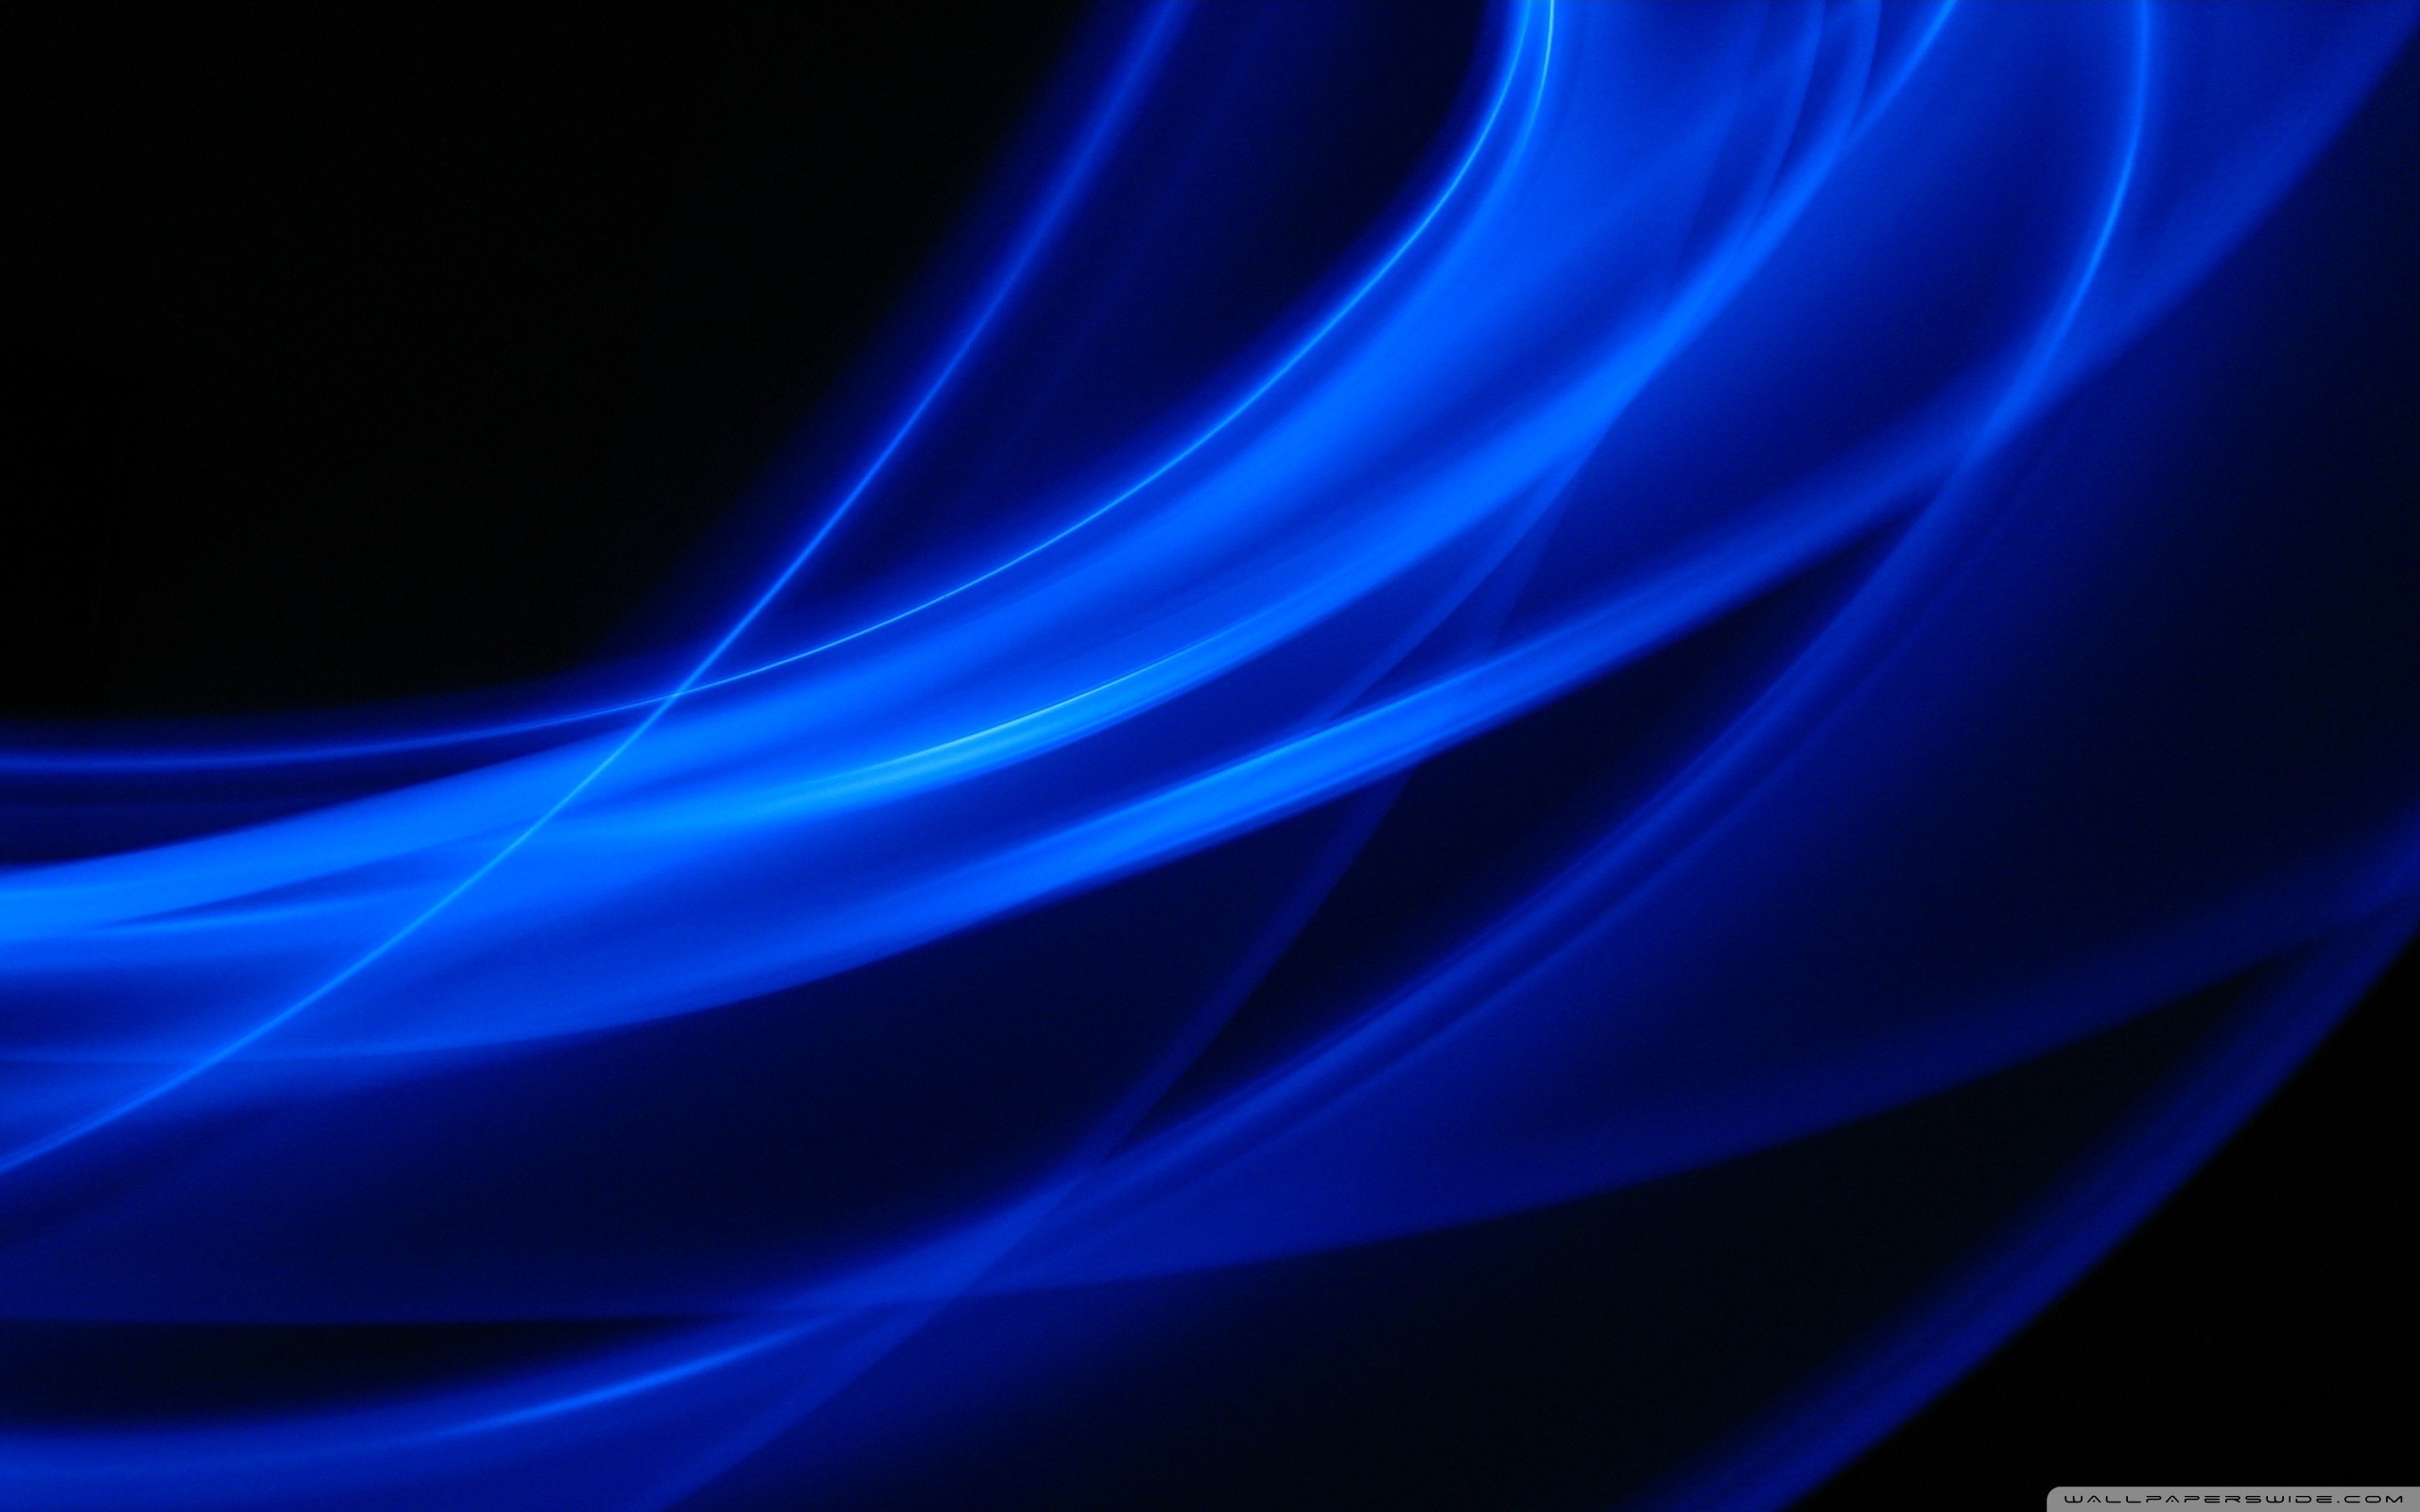 Gallery For gt Dark Blue Backgrounds